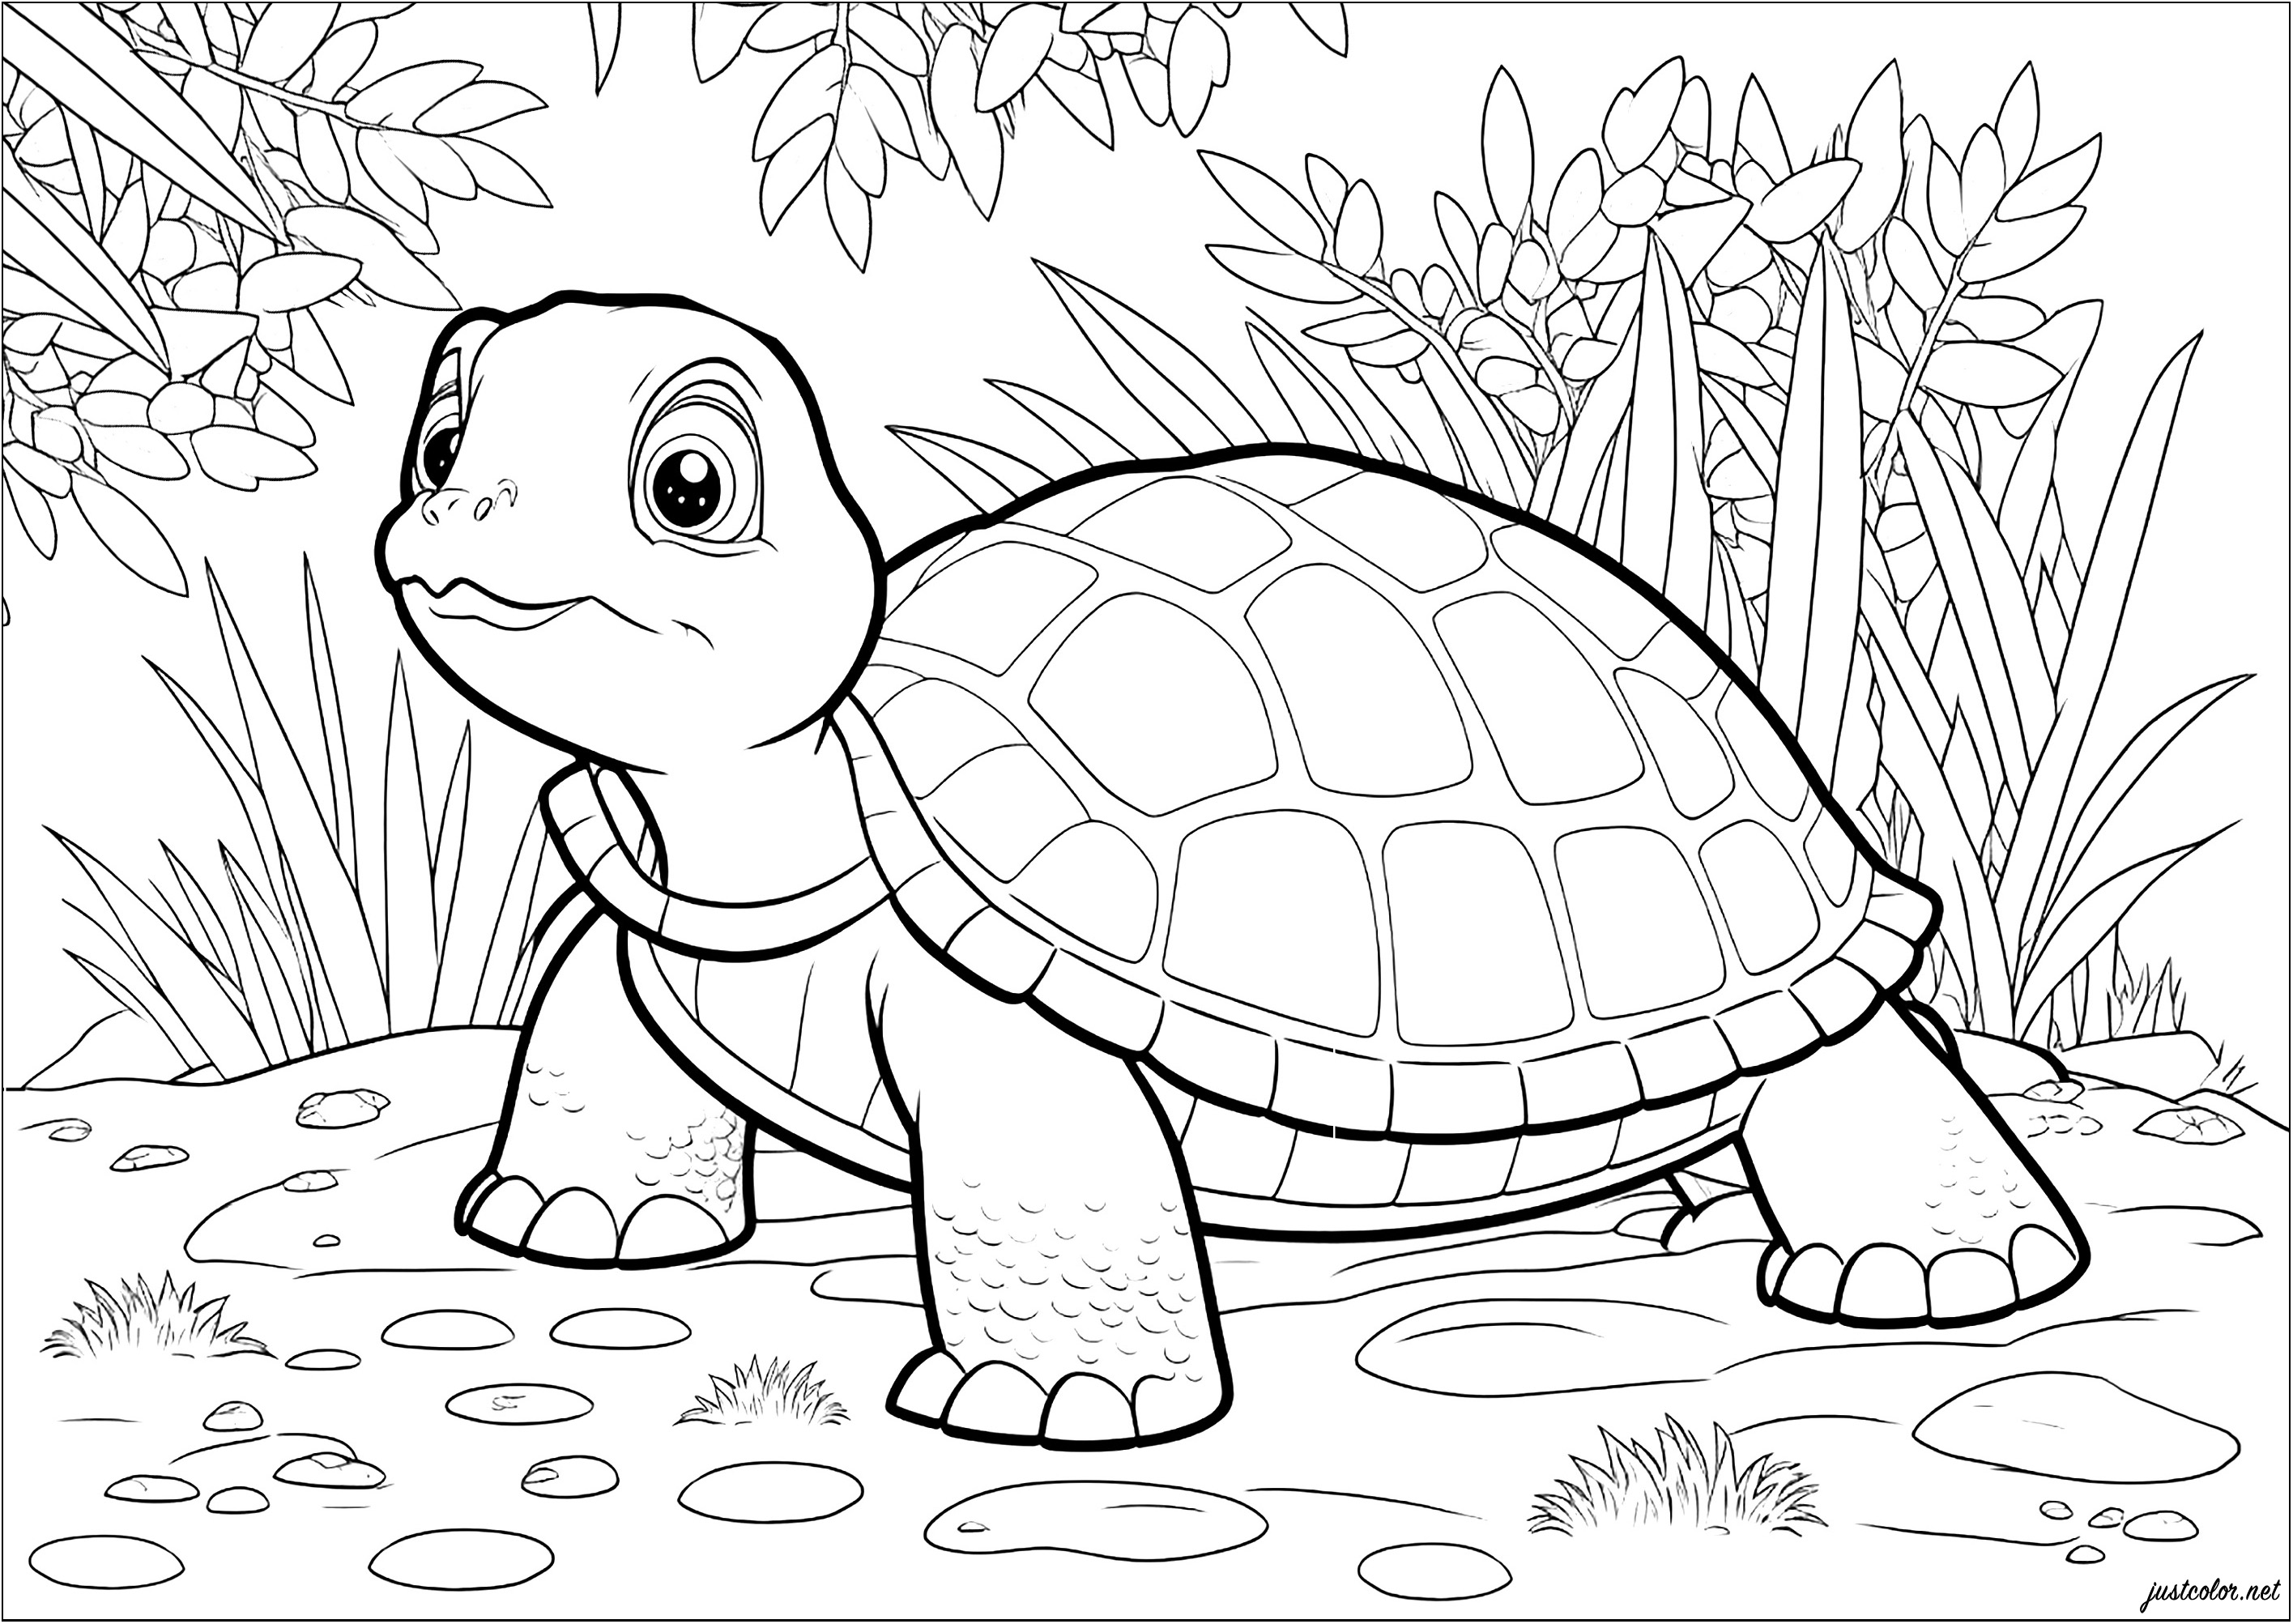 Turtle Coloring Pages - Free Printable Sheets for Kids | Skip To My Lou